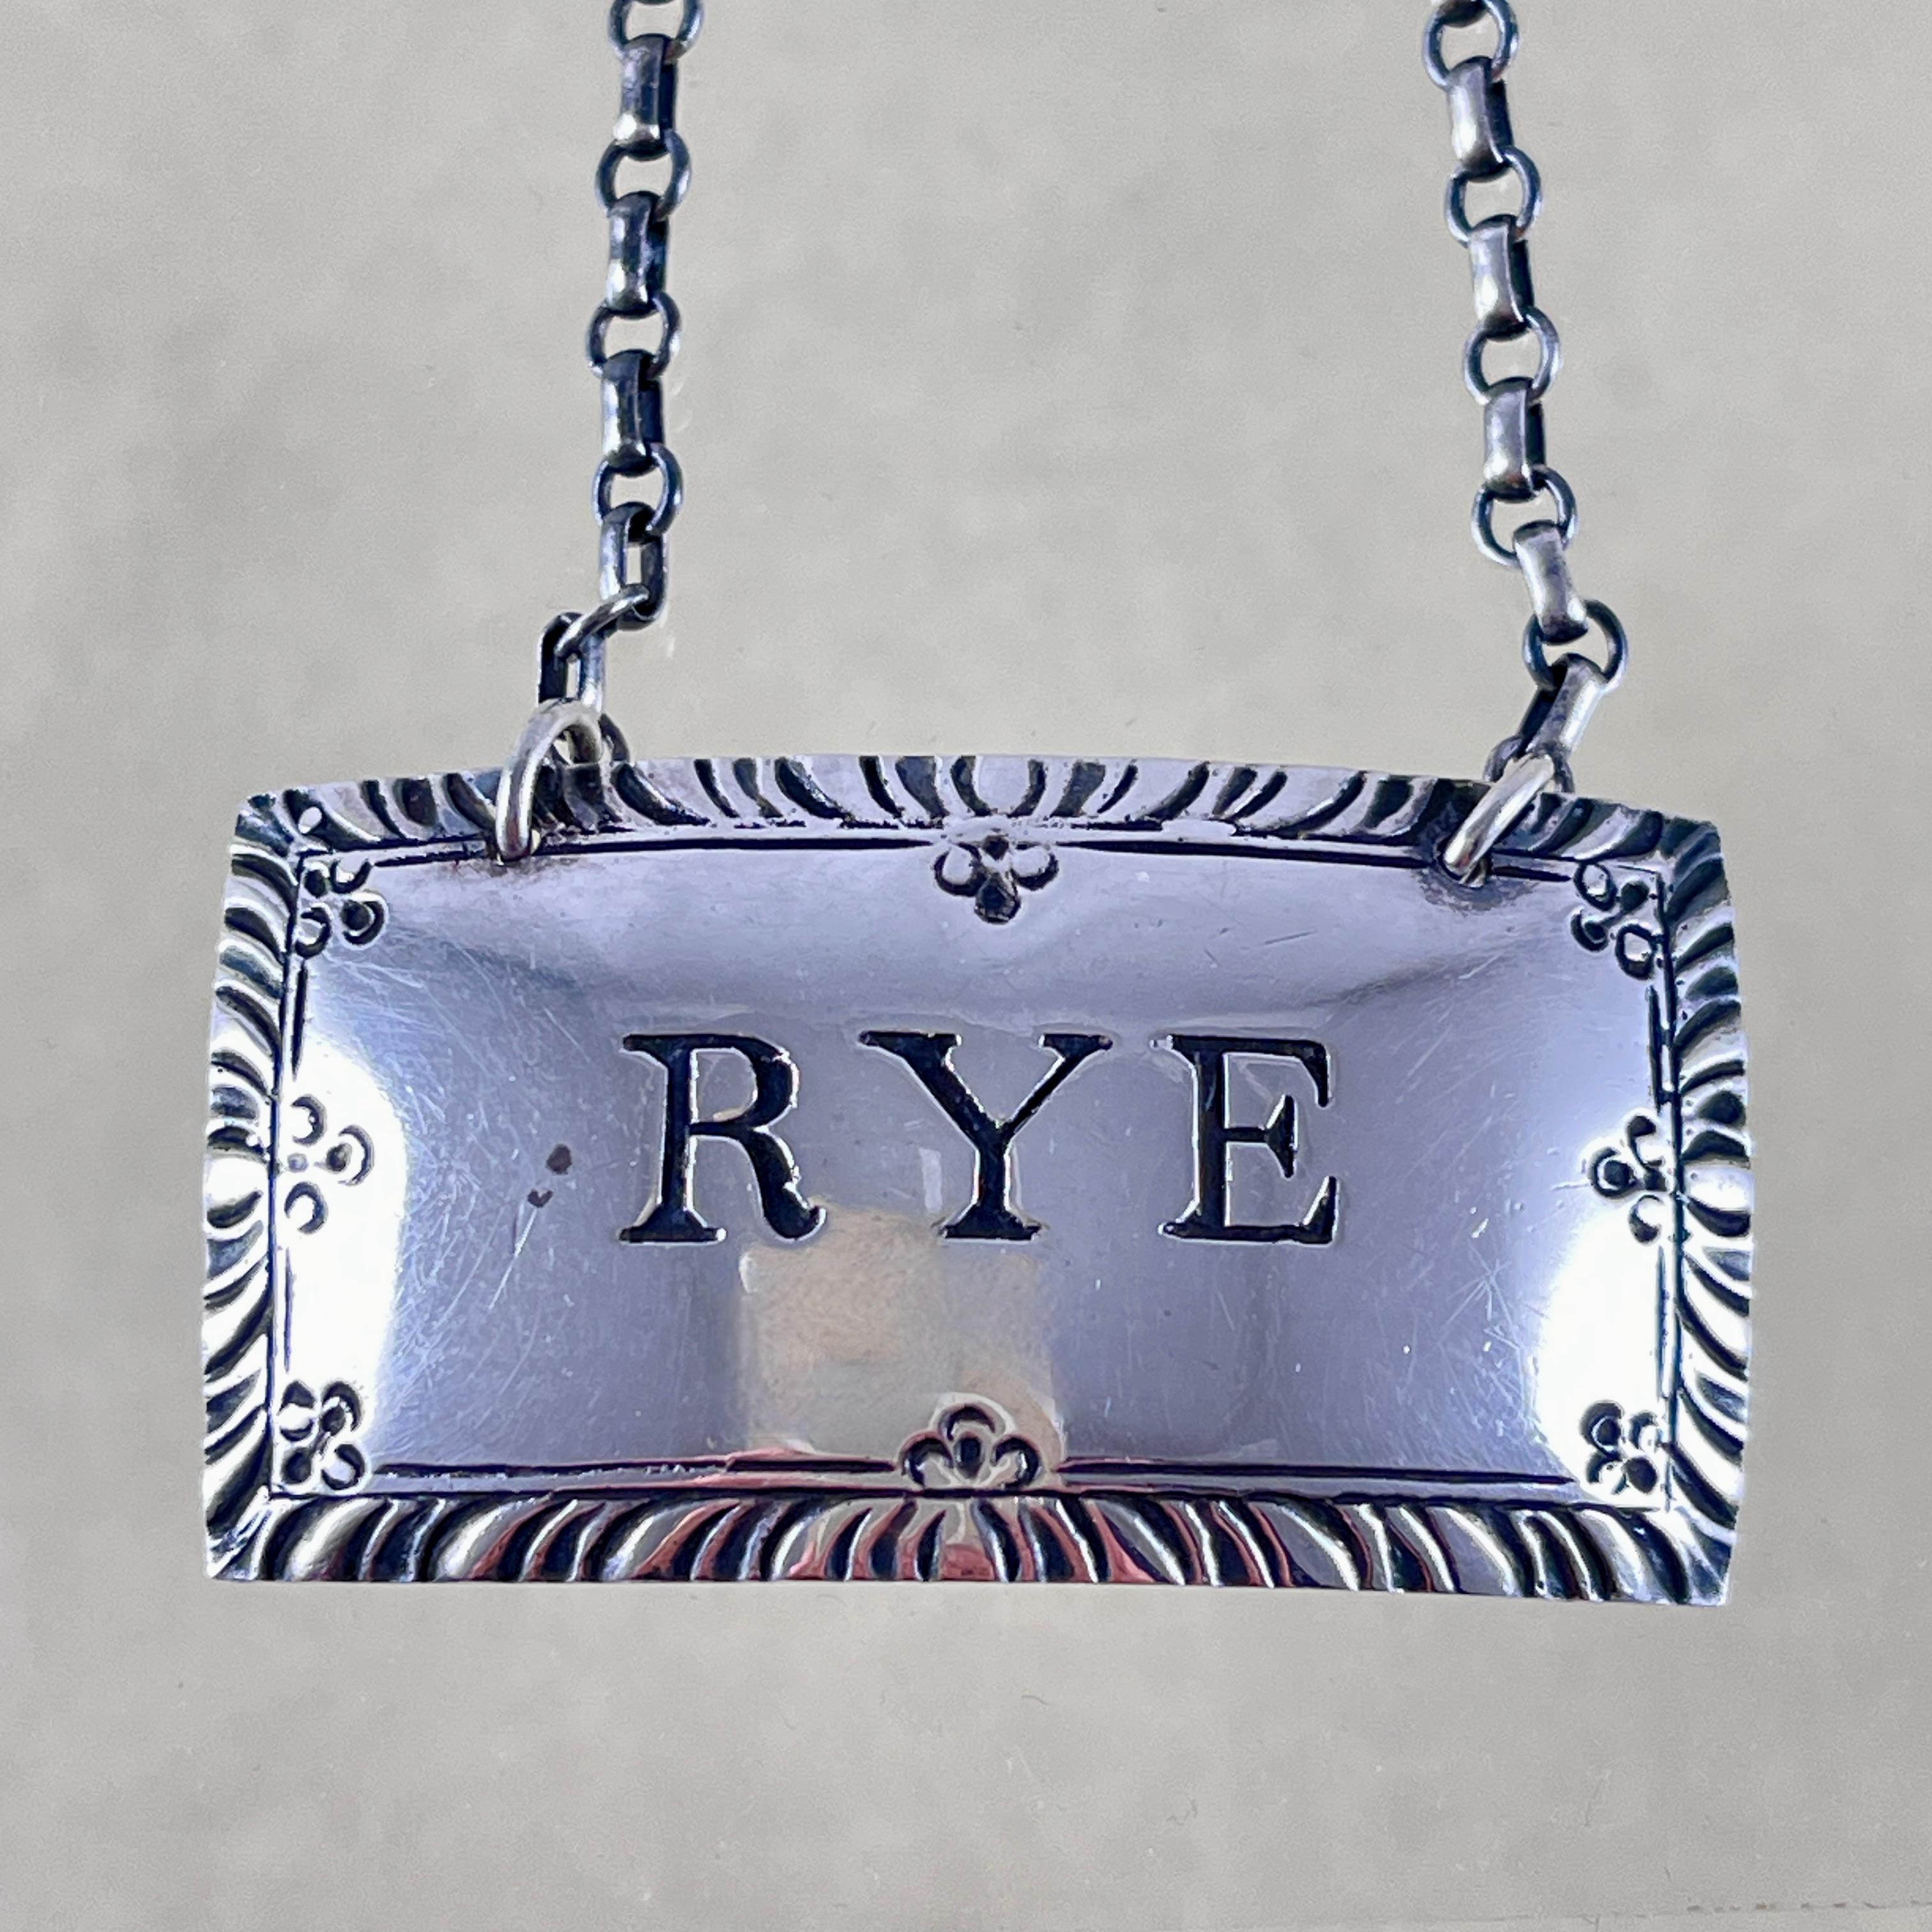 From the Stieff Silver Company in Baltimore, Maryland, a sterling silver liquor collar tag, circa 1930s.

The rectangular and curved tag is engraved, Rye, in a block type with a deeply engraved border. It hangs from a sterling chain on any decanter,